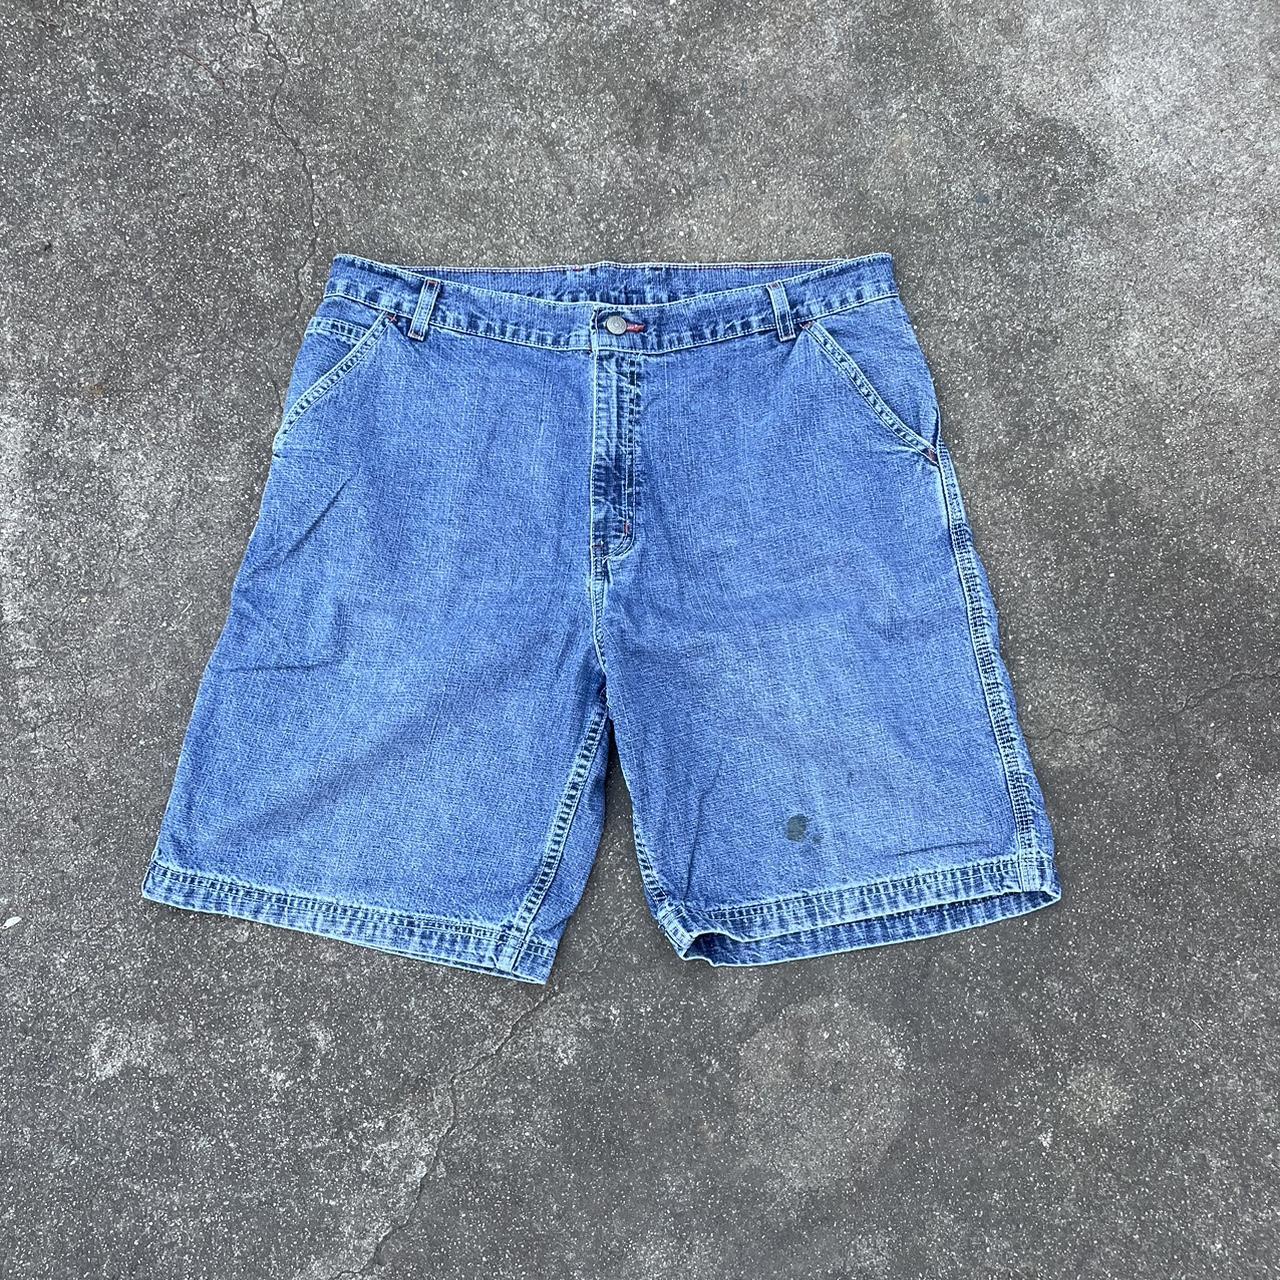 Vintage Faded Glory Jorts Size 38 Baggy fit Small... - Depop